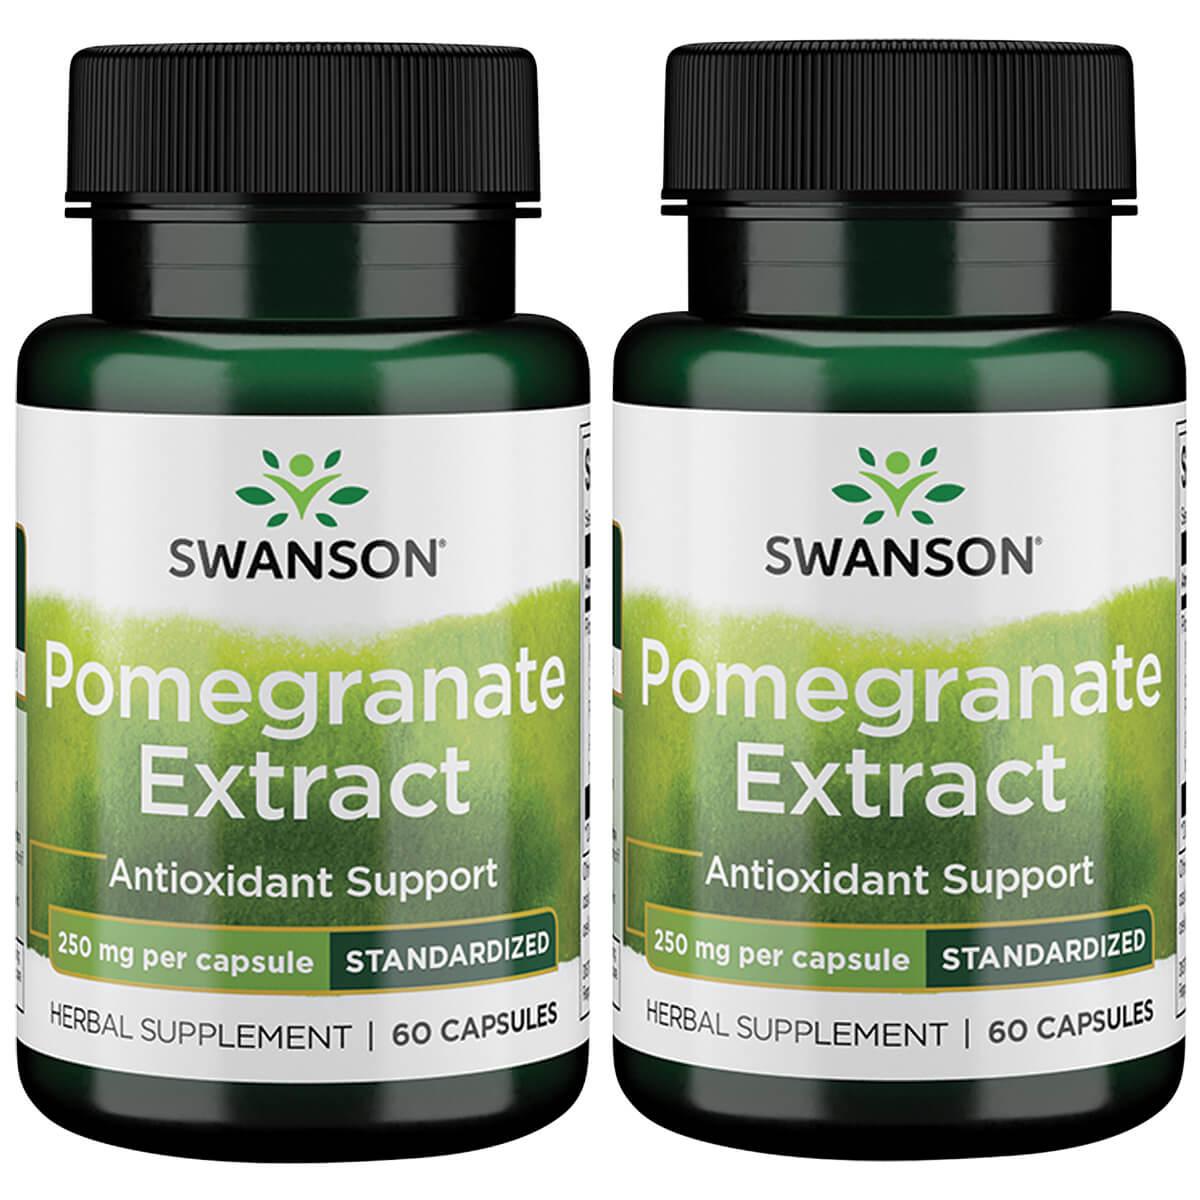 Swanson Superior Herbs Pomegranate Extract - Standardized 2 Pack Vitamin 250 mg 60 Caps